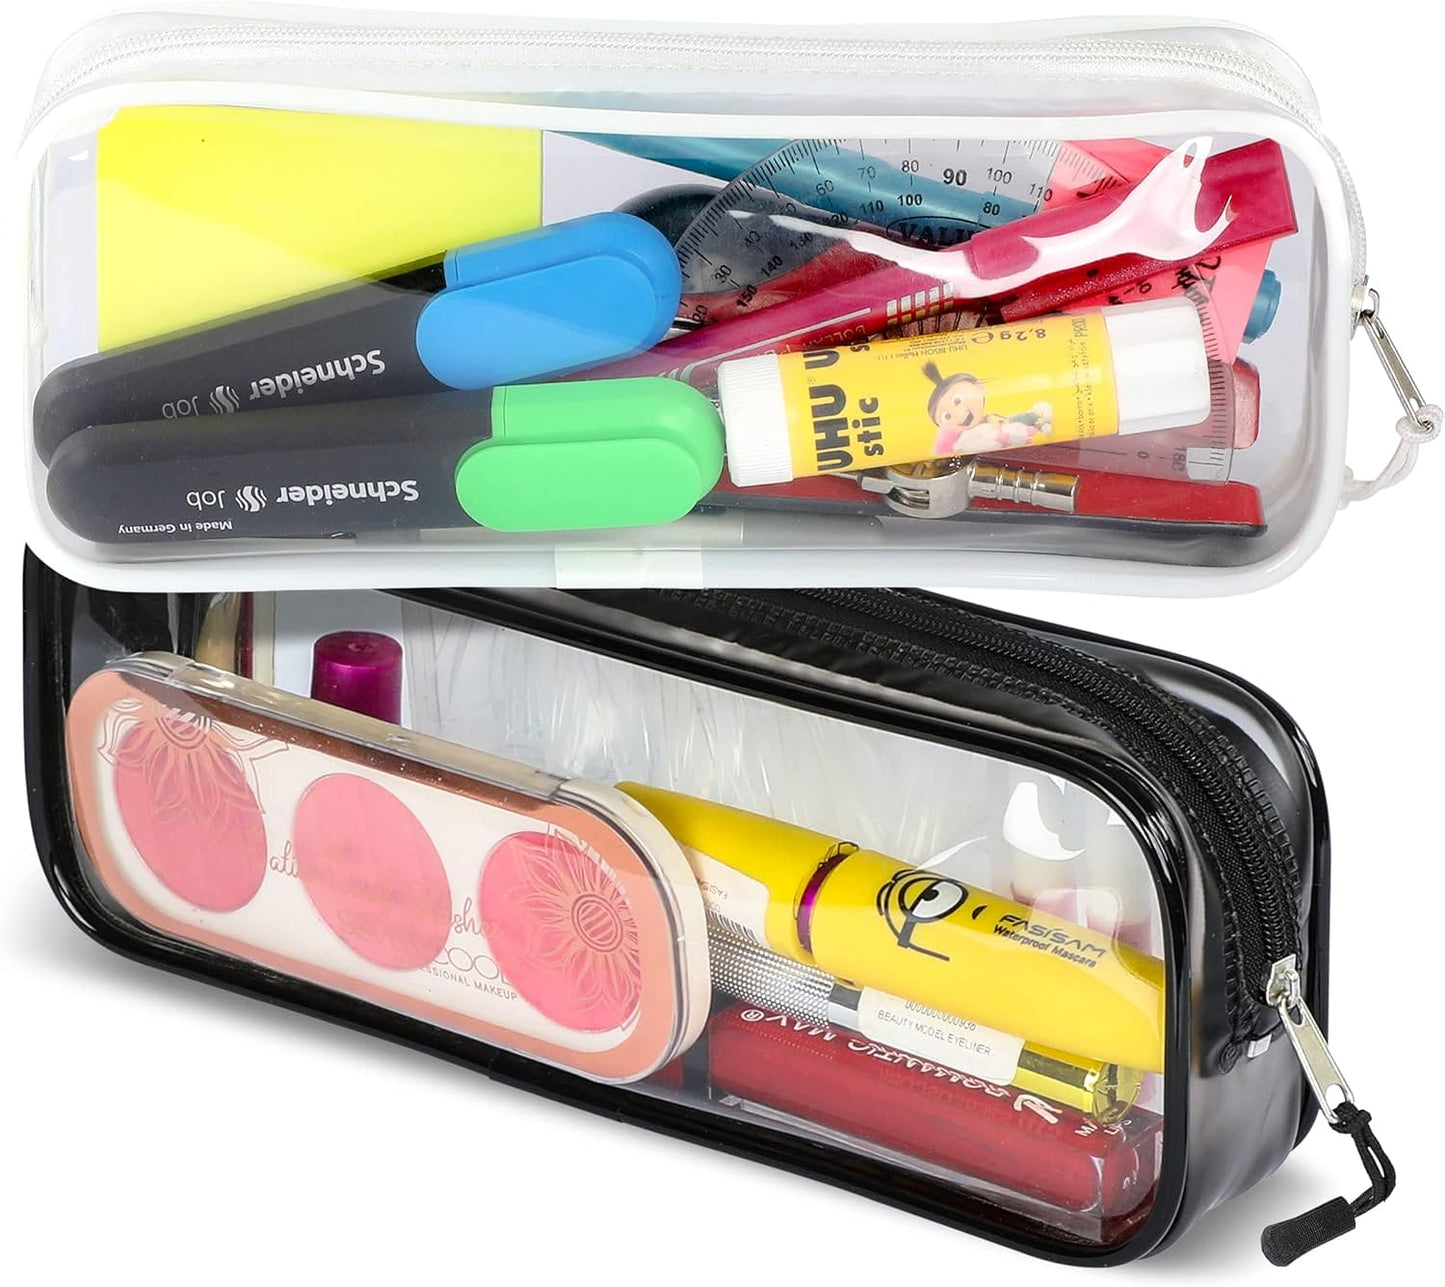 Zamasha Clear Pencil Case Black with Strong Zipper | 22x4x9 cm Stylish, Practical and Transparent Pencil Case | Versatile Storage for Stationery, Toiletries, Makeup, Travel & Office Supplies